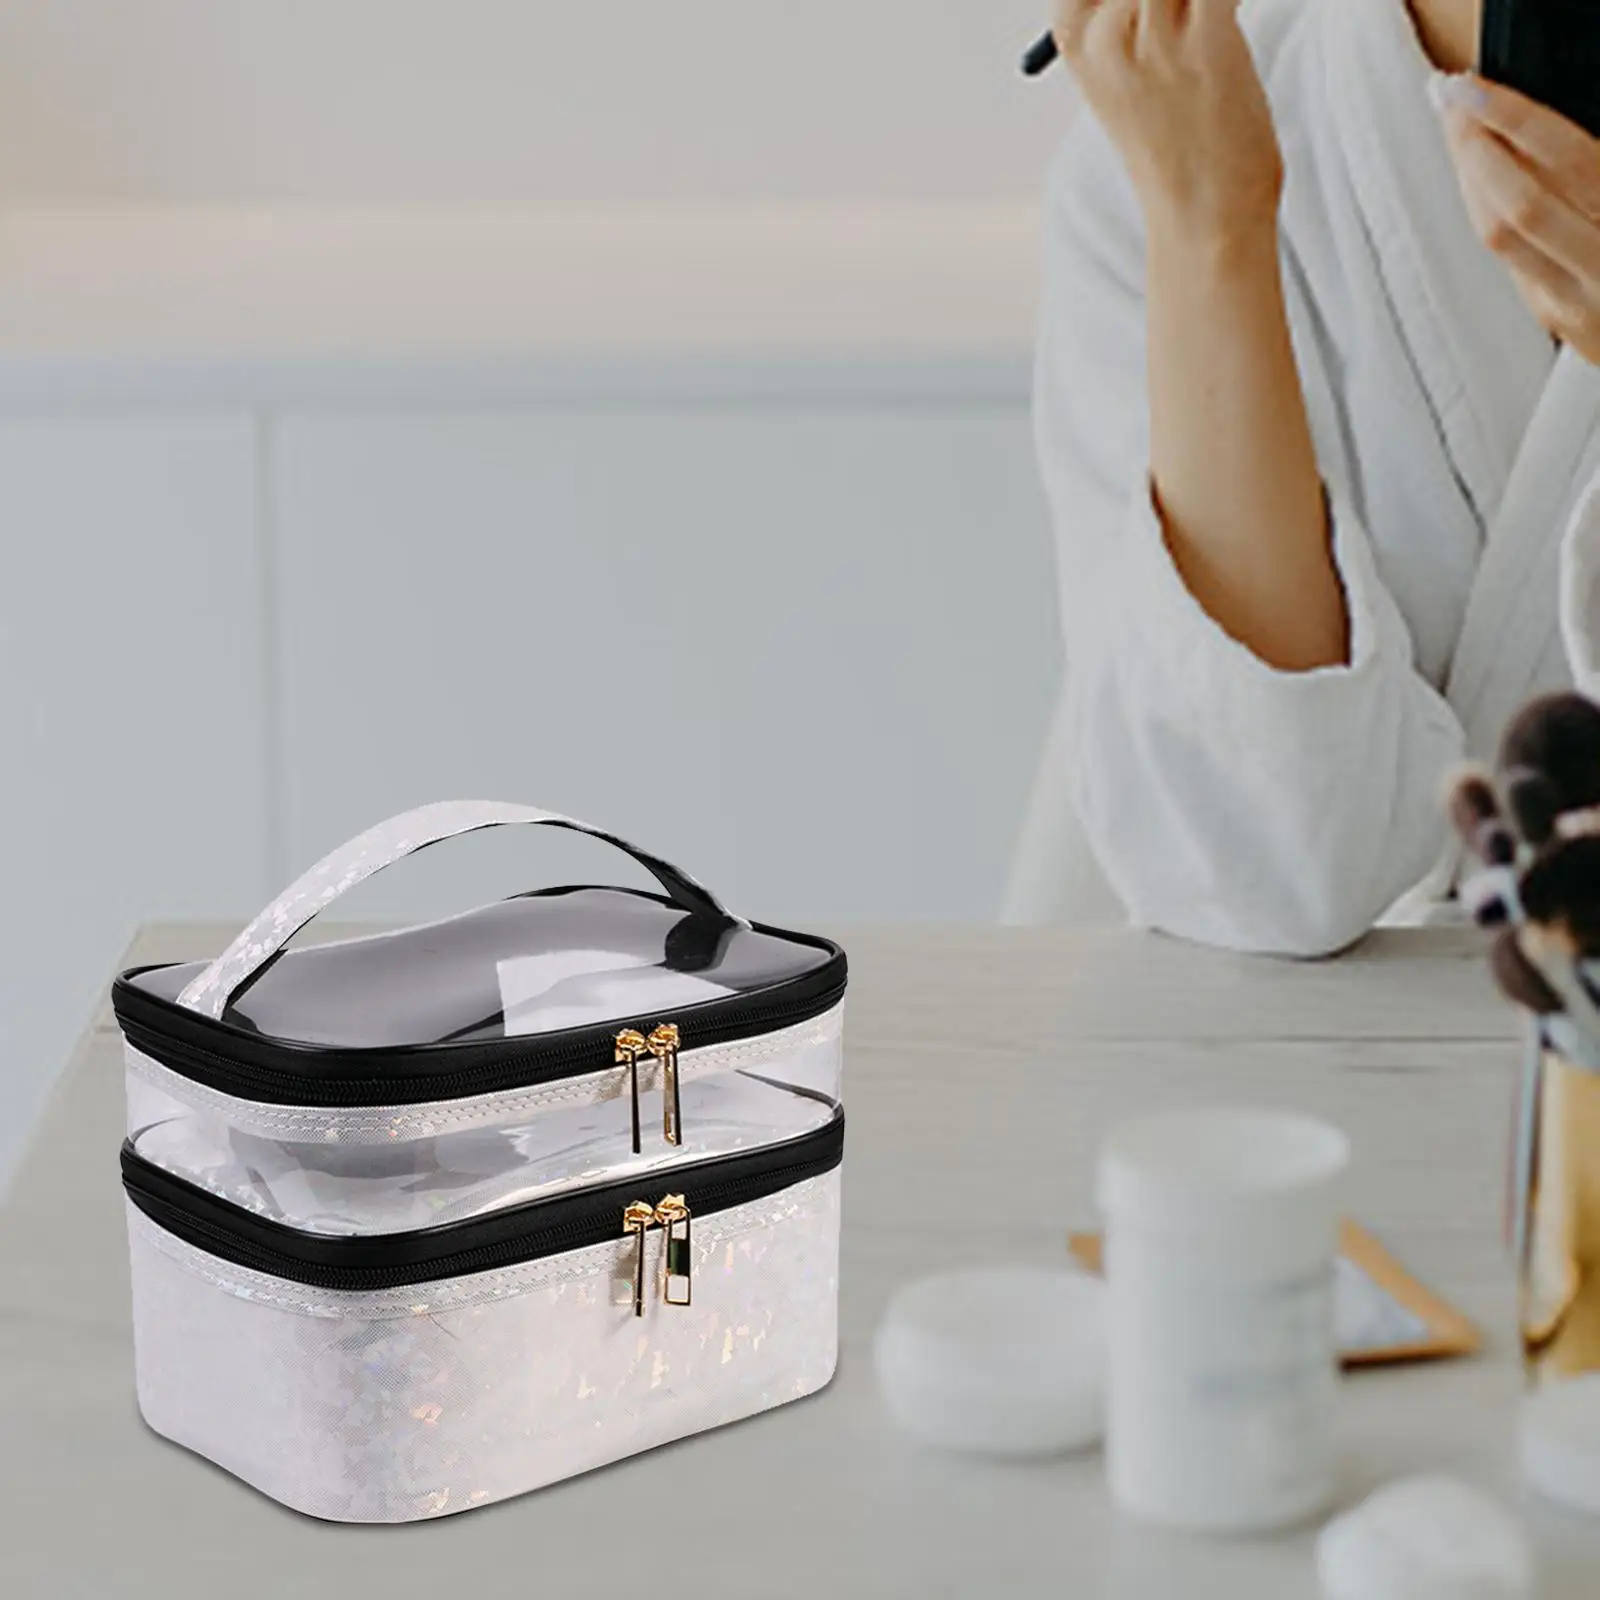 Portable Double Layer Cosmetic Bag Travel Makeup Bag with Handle Foldable